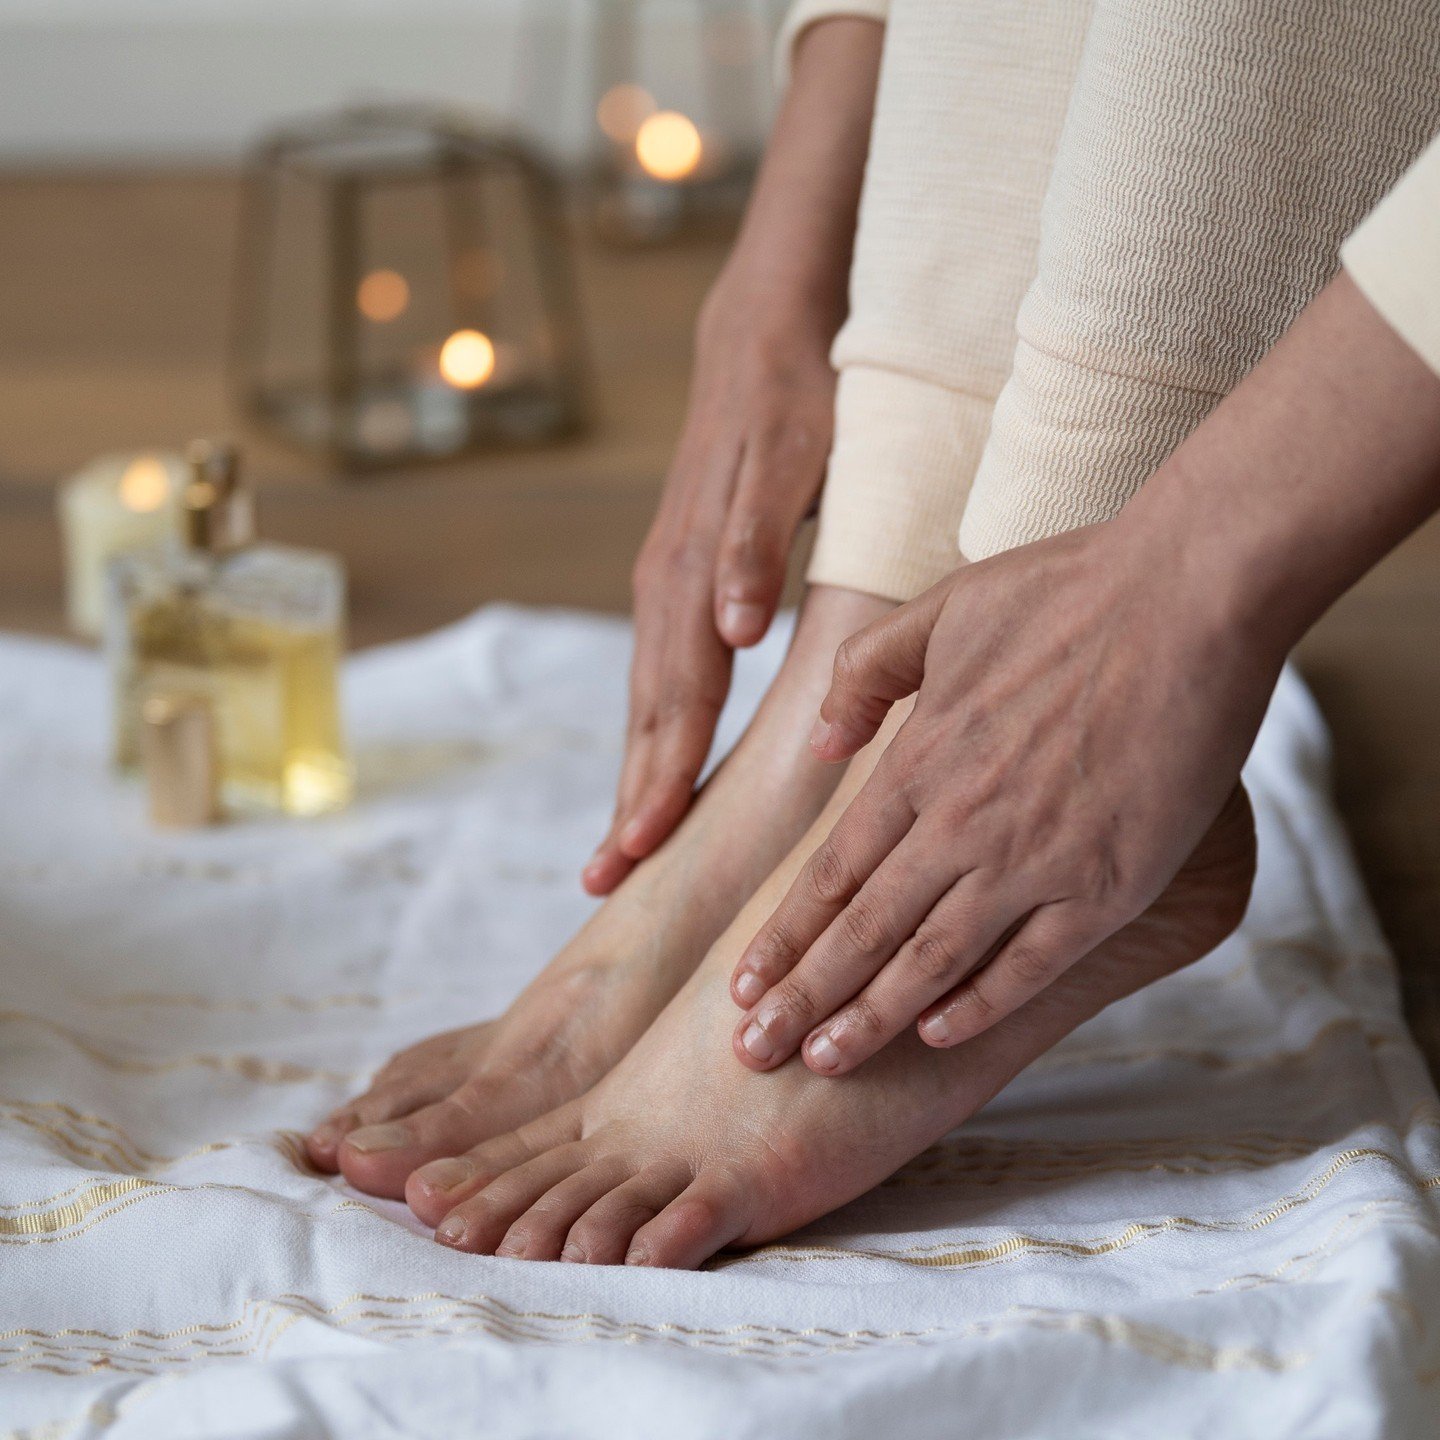 Step into pure bliss and let the stress melt away with a divine foot soak in warm water and salt. ⁠
⁠
Indulge in a moment of serenity as the soothing water embraces your tired feet. Close your eyes, take a deep breath, and let relaxation wash over yo